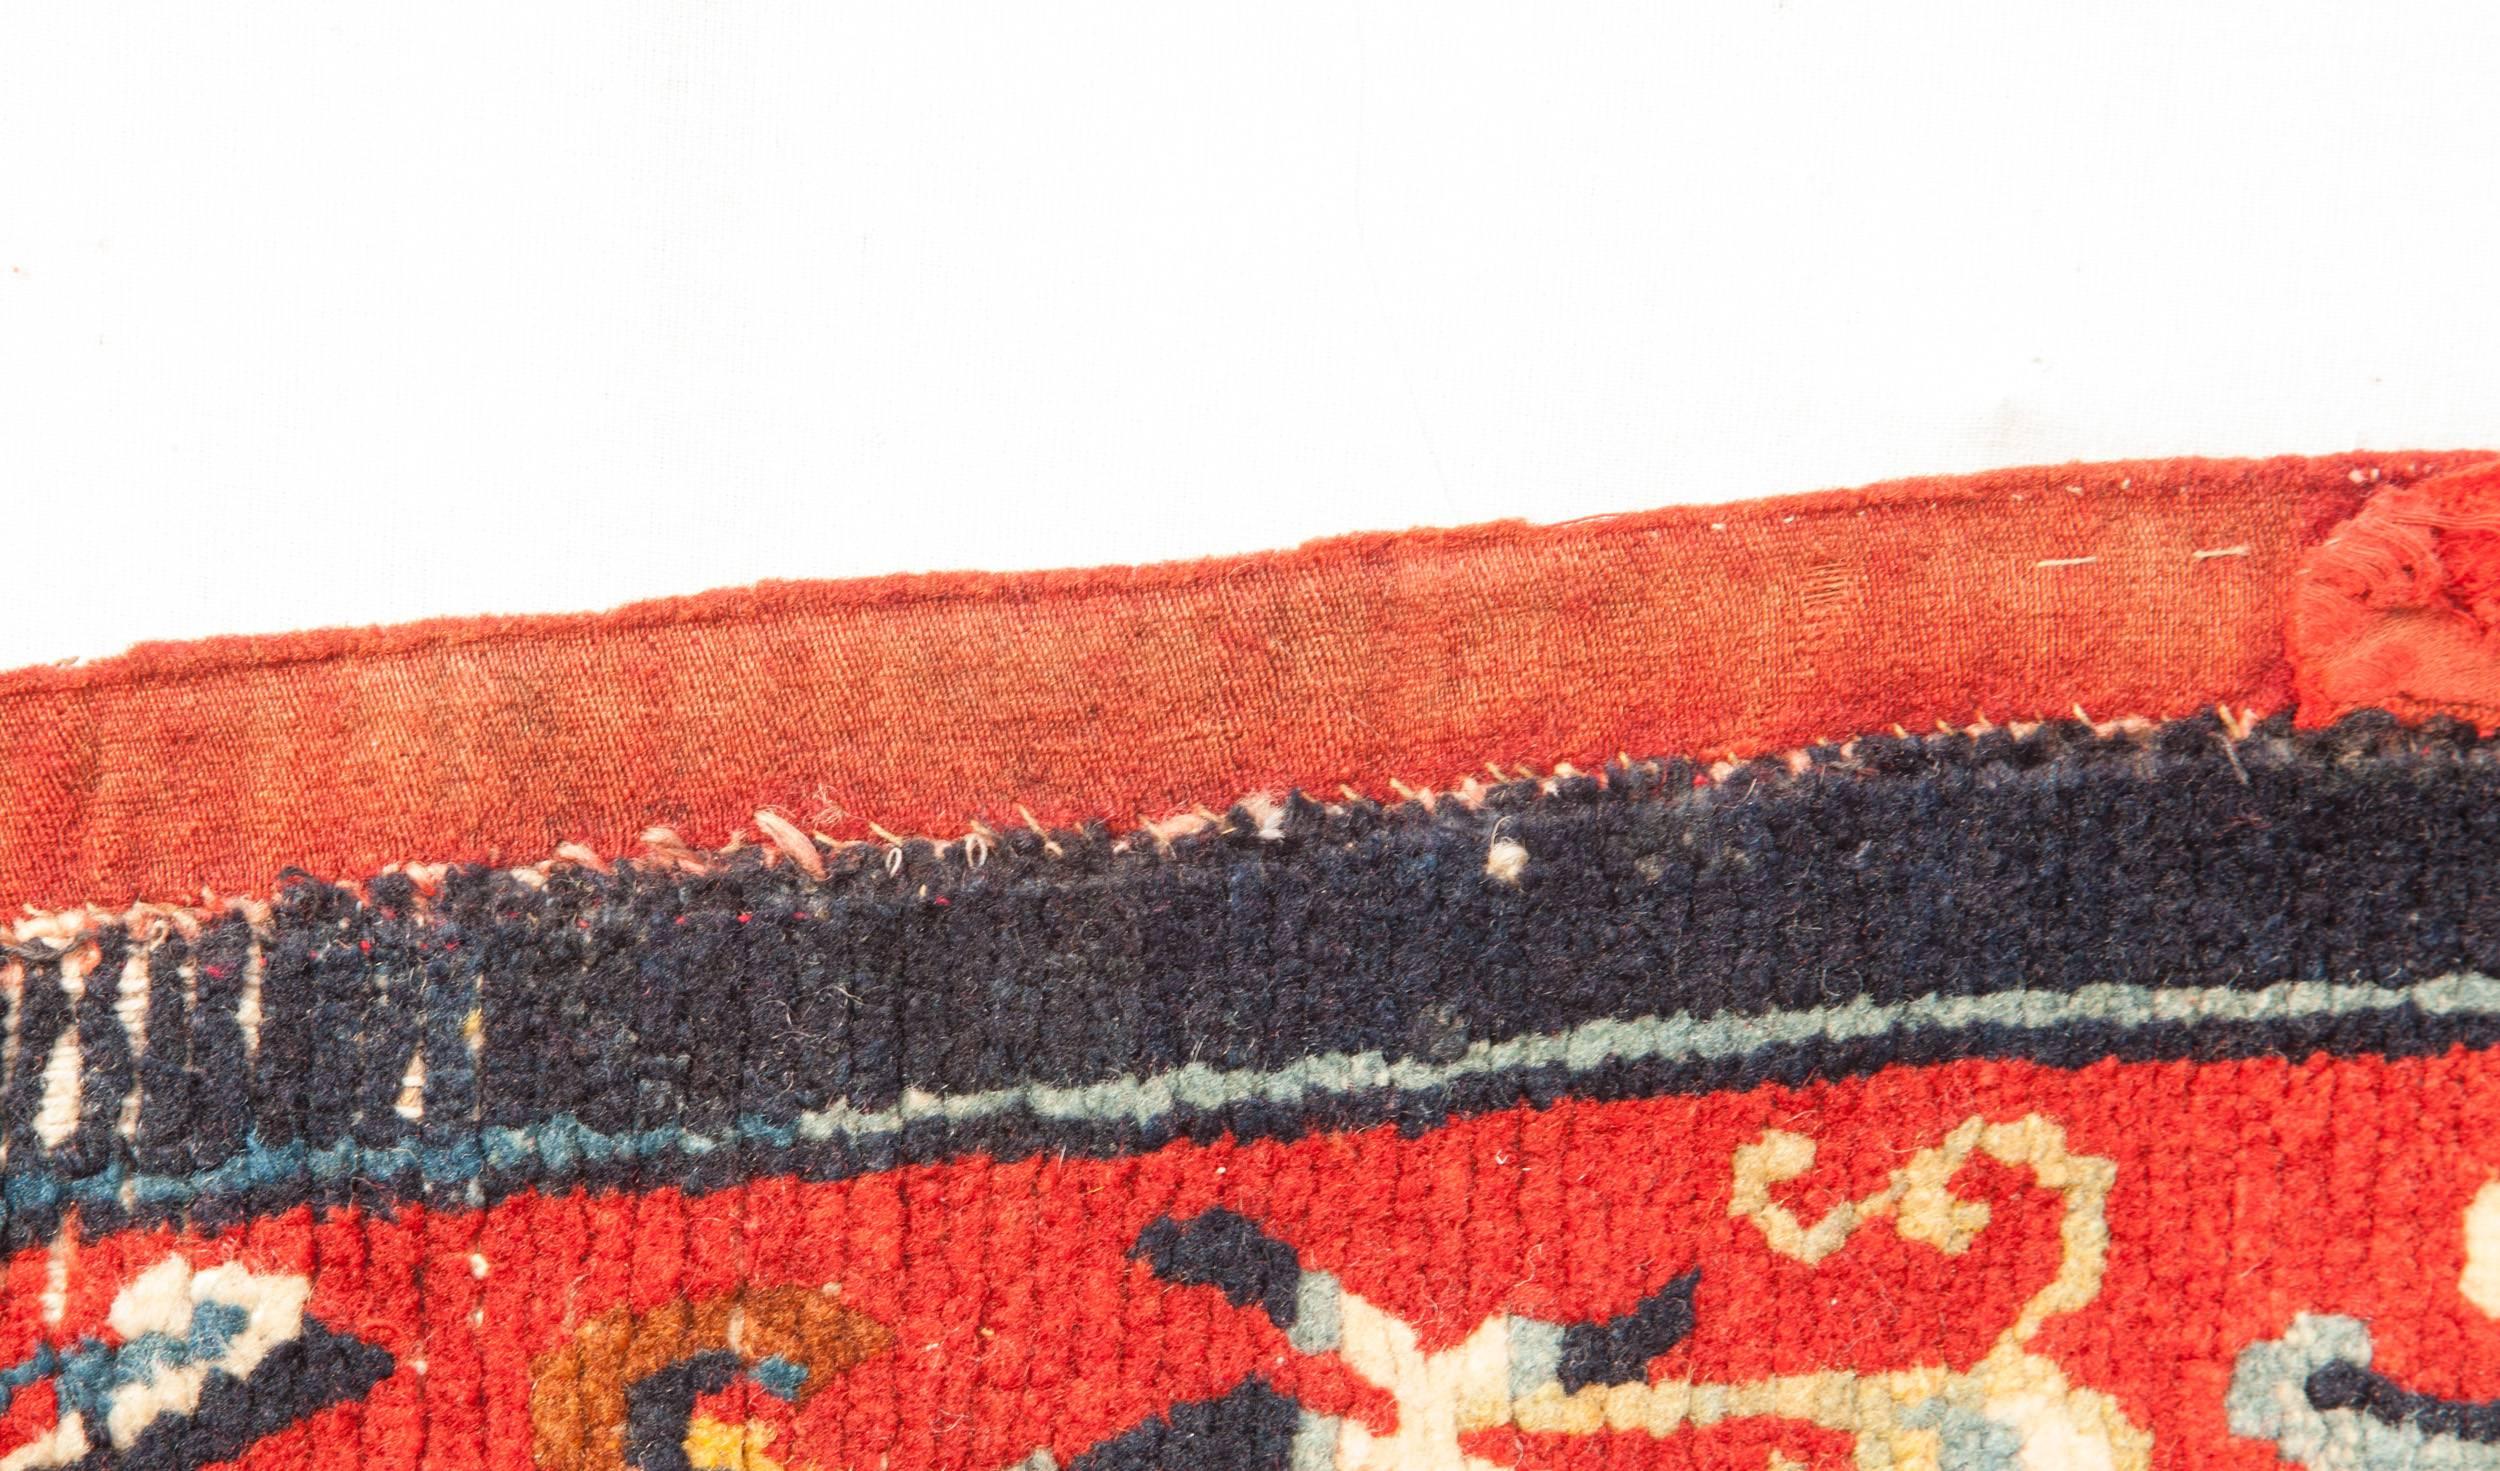 Hand-Woven Early 20th Century Antique Sadlle Rug from Tibet